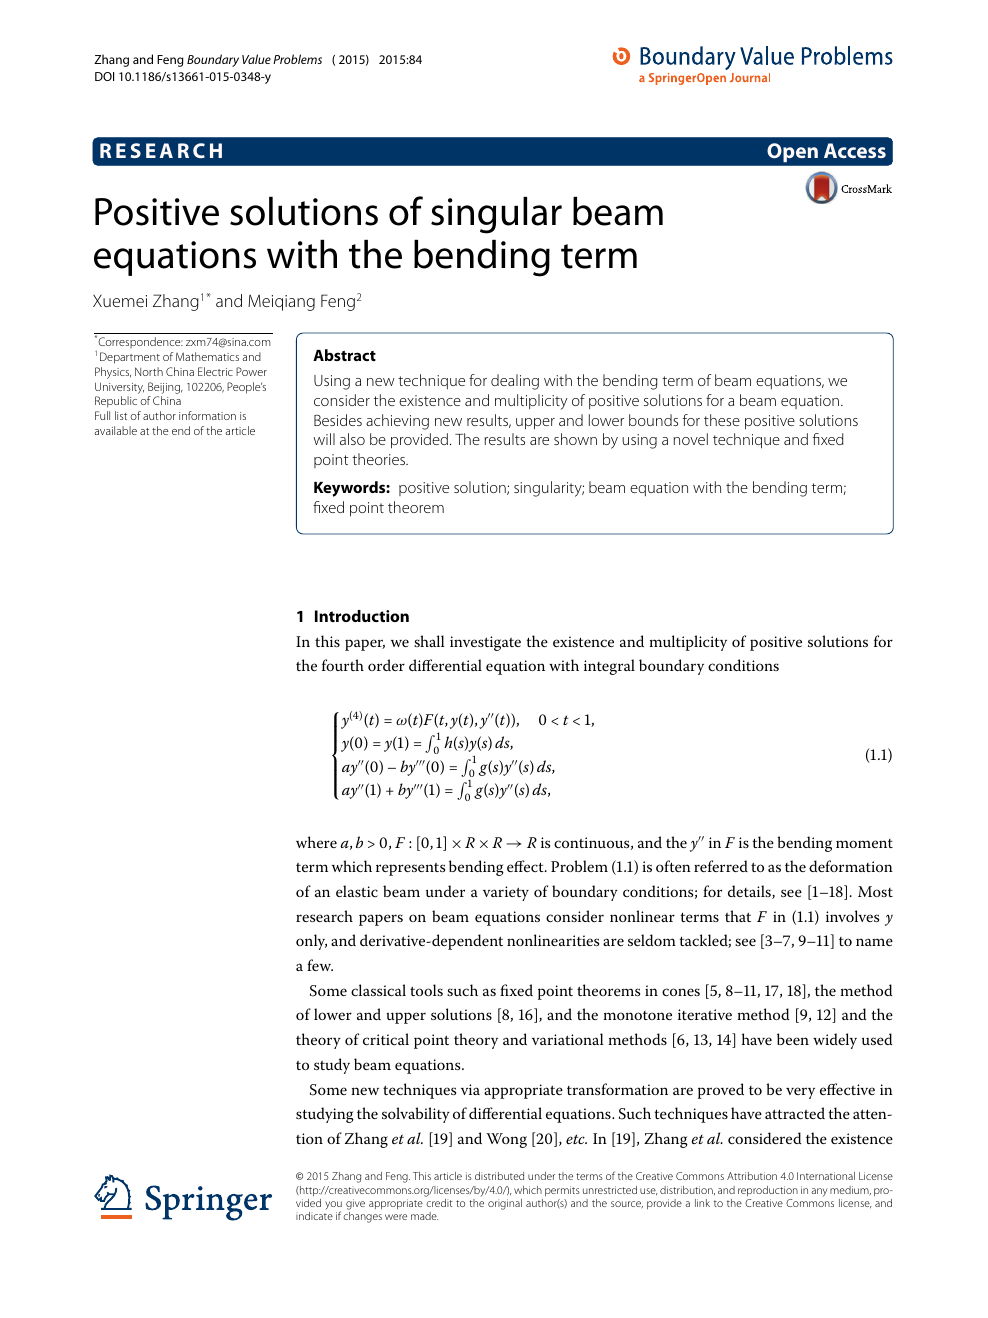 Positive Solutions Of Singular Beam Equations With The Bending Term Topic Of Research Paper In Mathematics Download Scholarly Article Pdf And Read For Free On Cyberleninka Open Science Hub